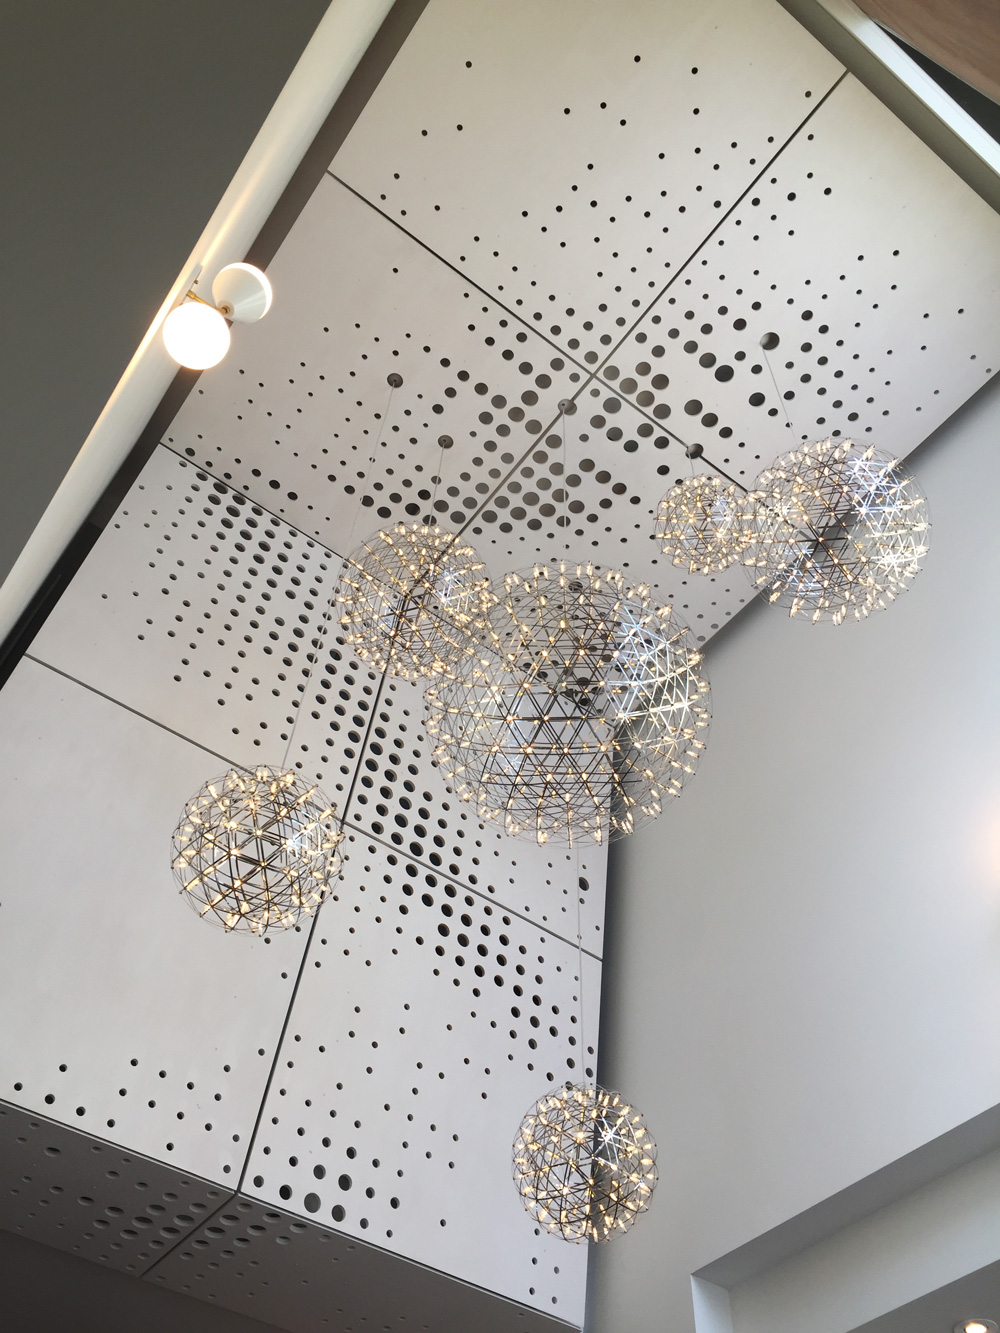 Unit 7 Architecture | Projects - Grenfell Foyer Screen